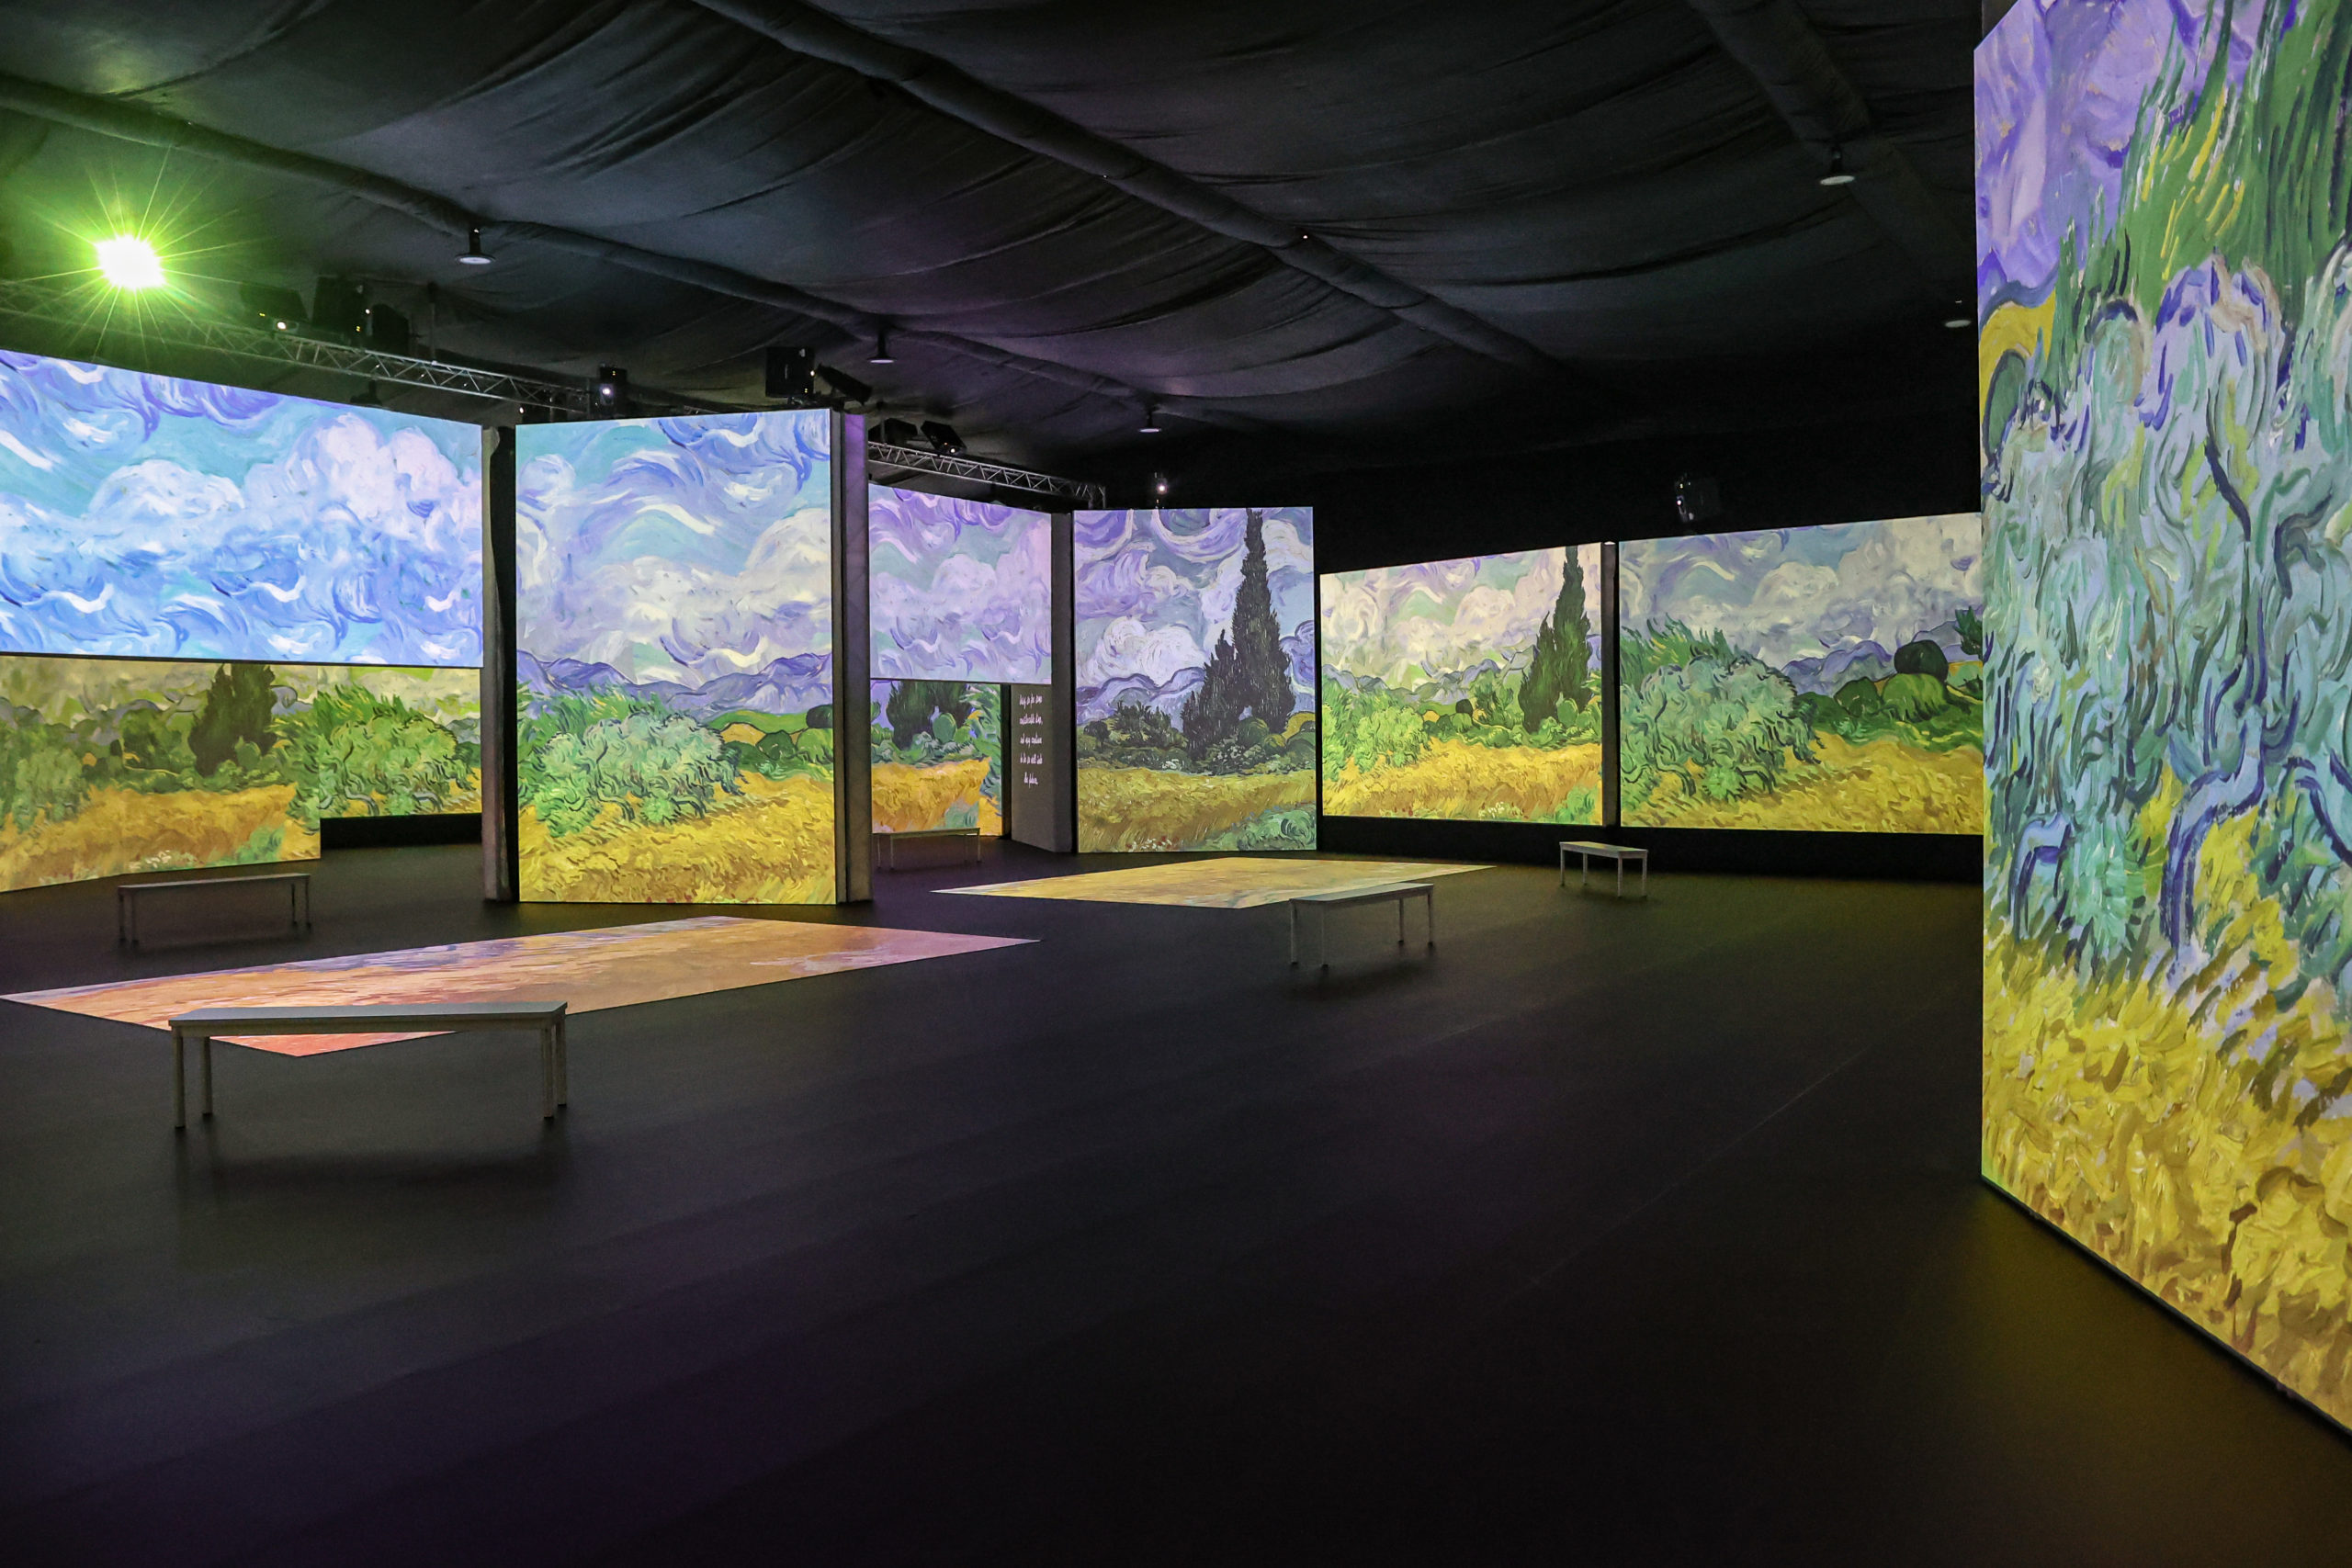 VAN GOGH ALIVE - Projections of Timeless Work Light up